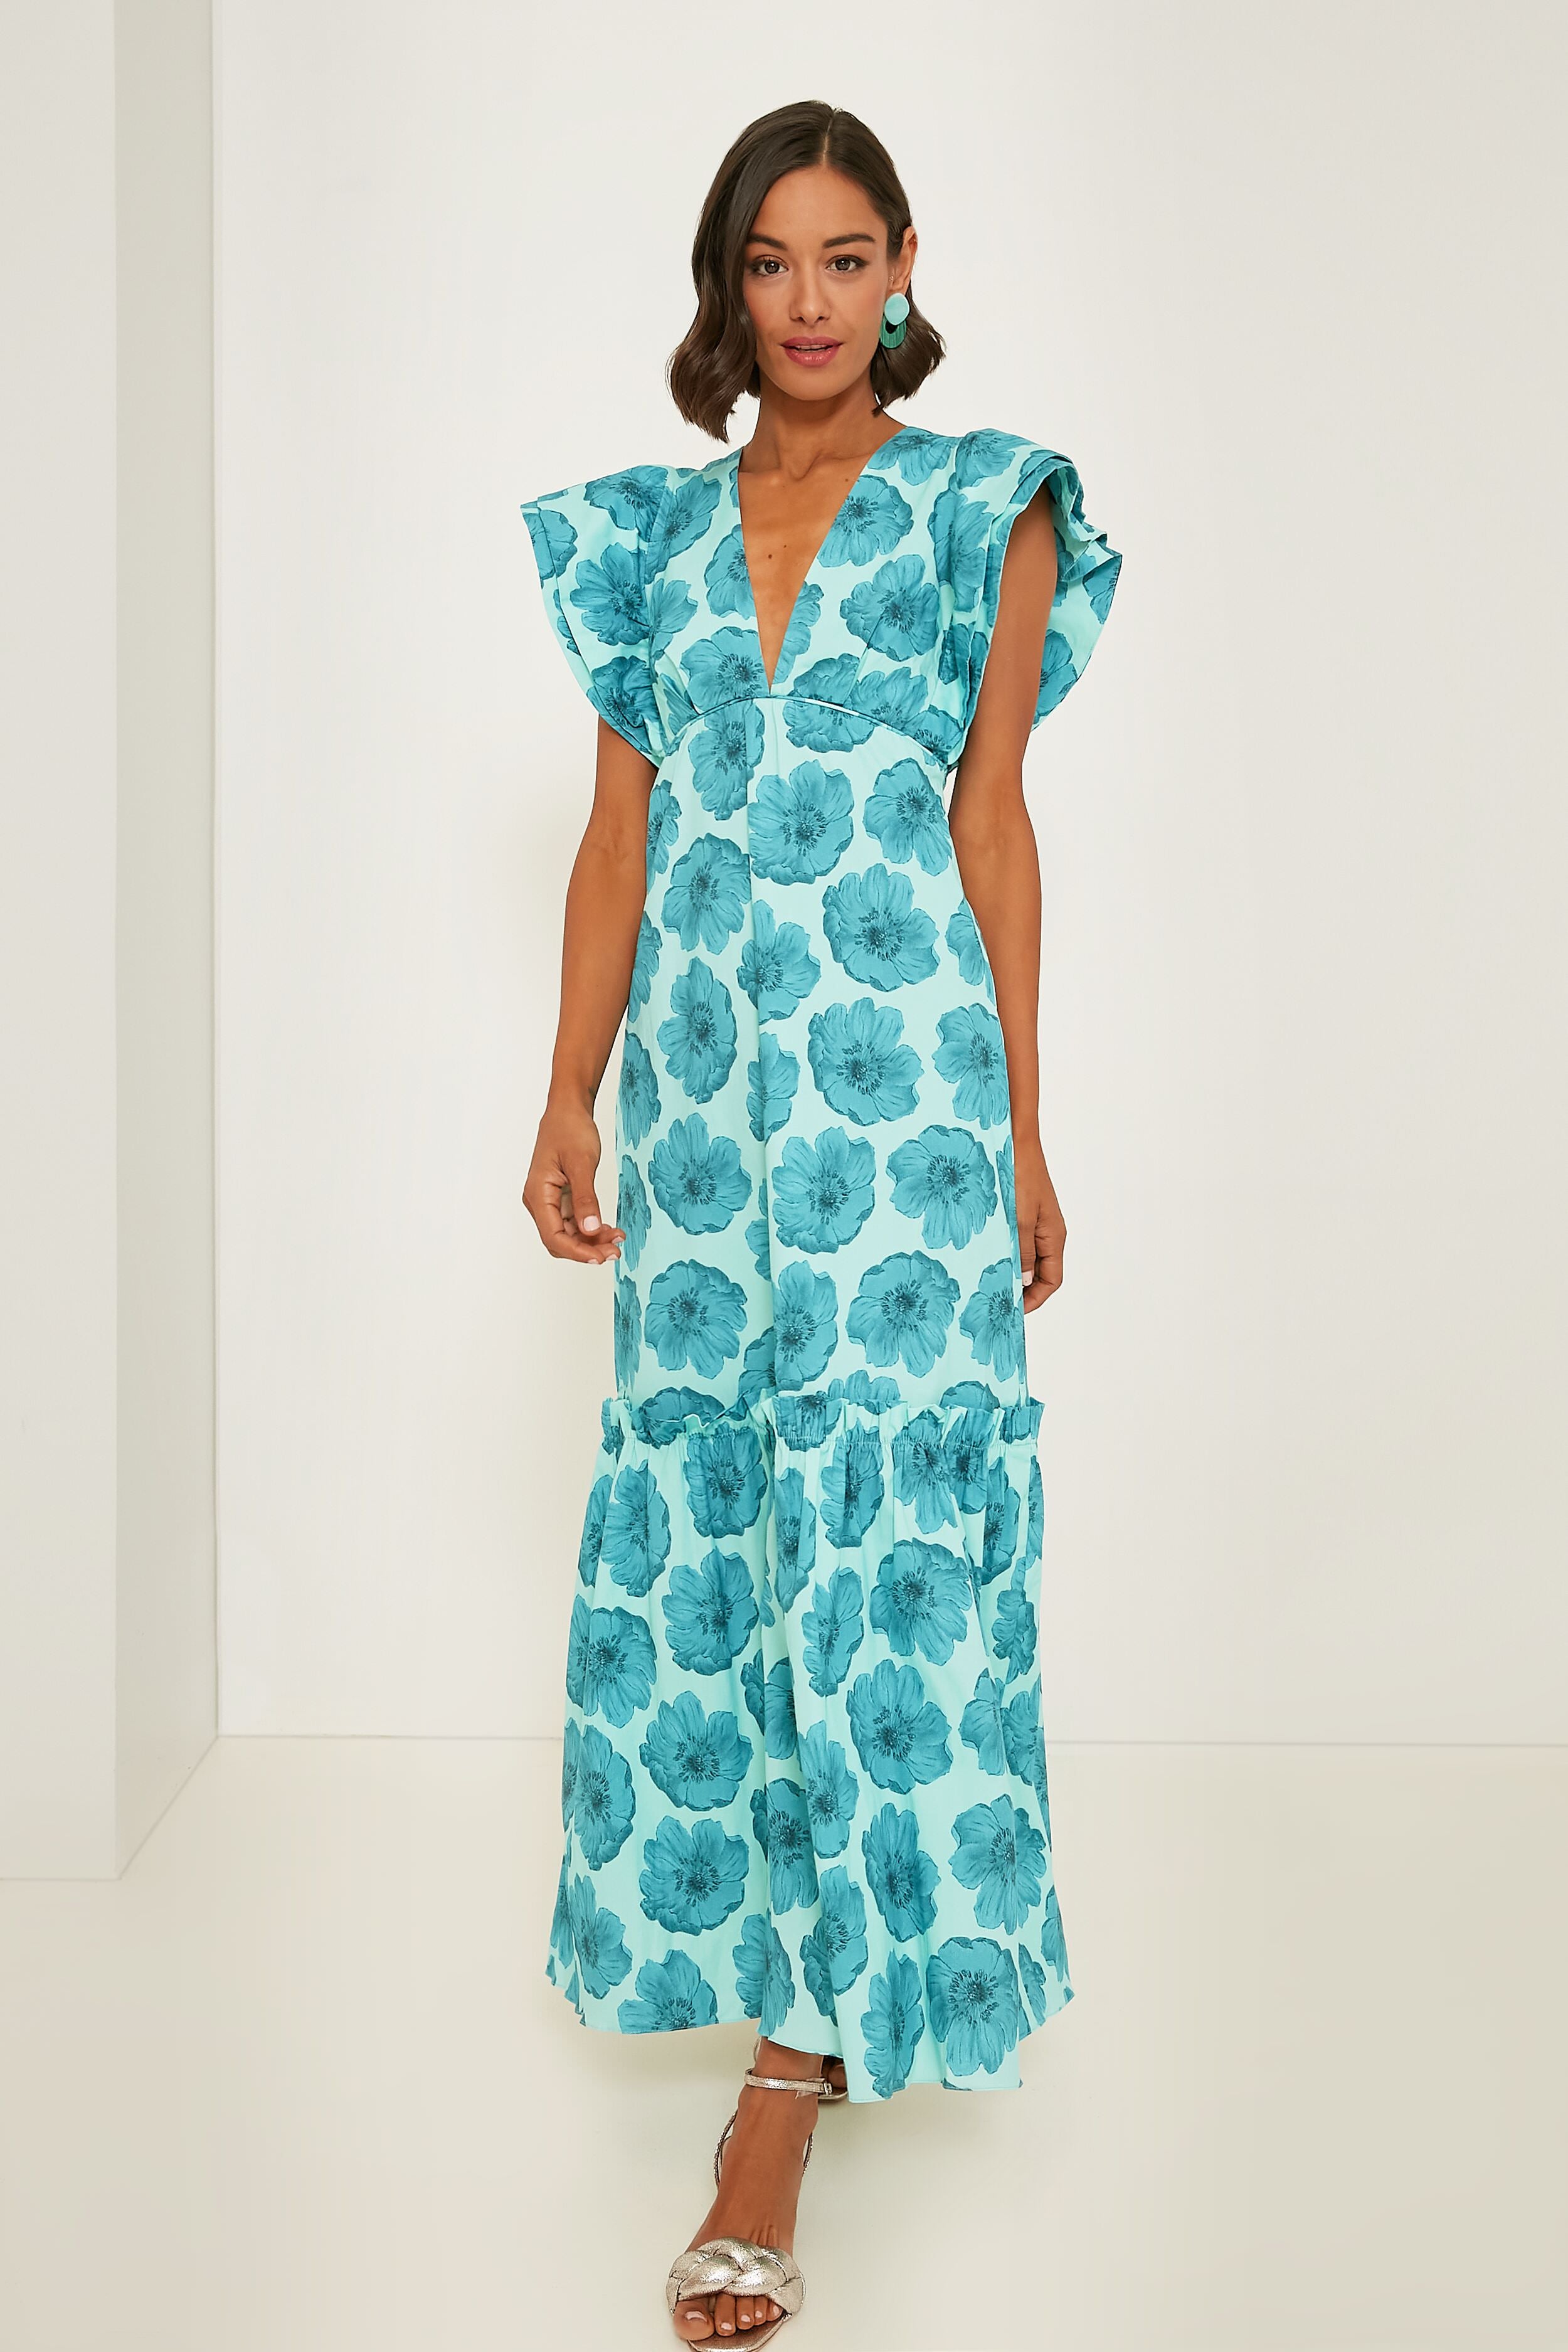 Turquoise Floral Classic Ruffled Long Dress | ADRIANA DEGREAS